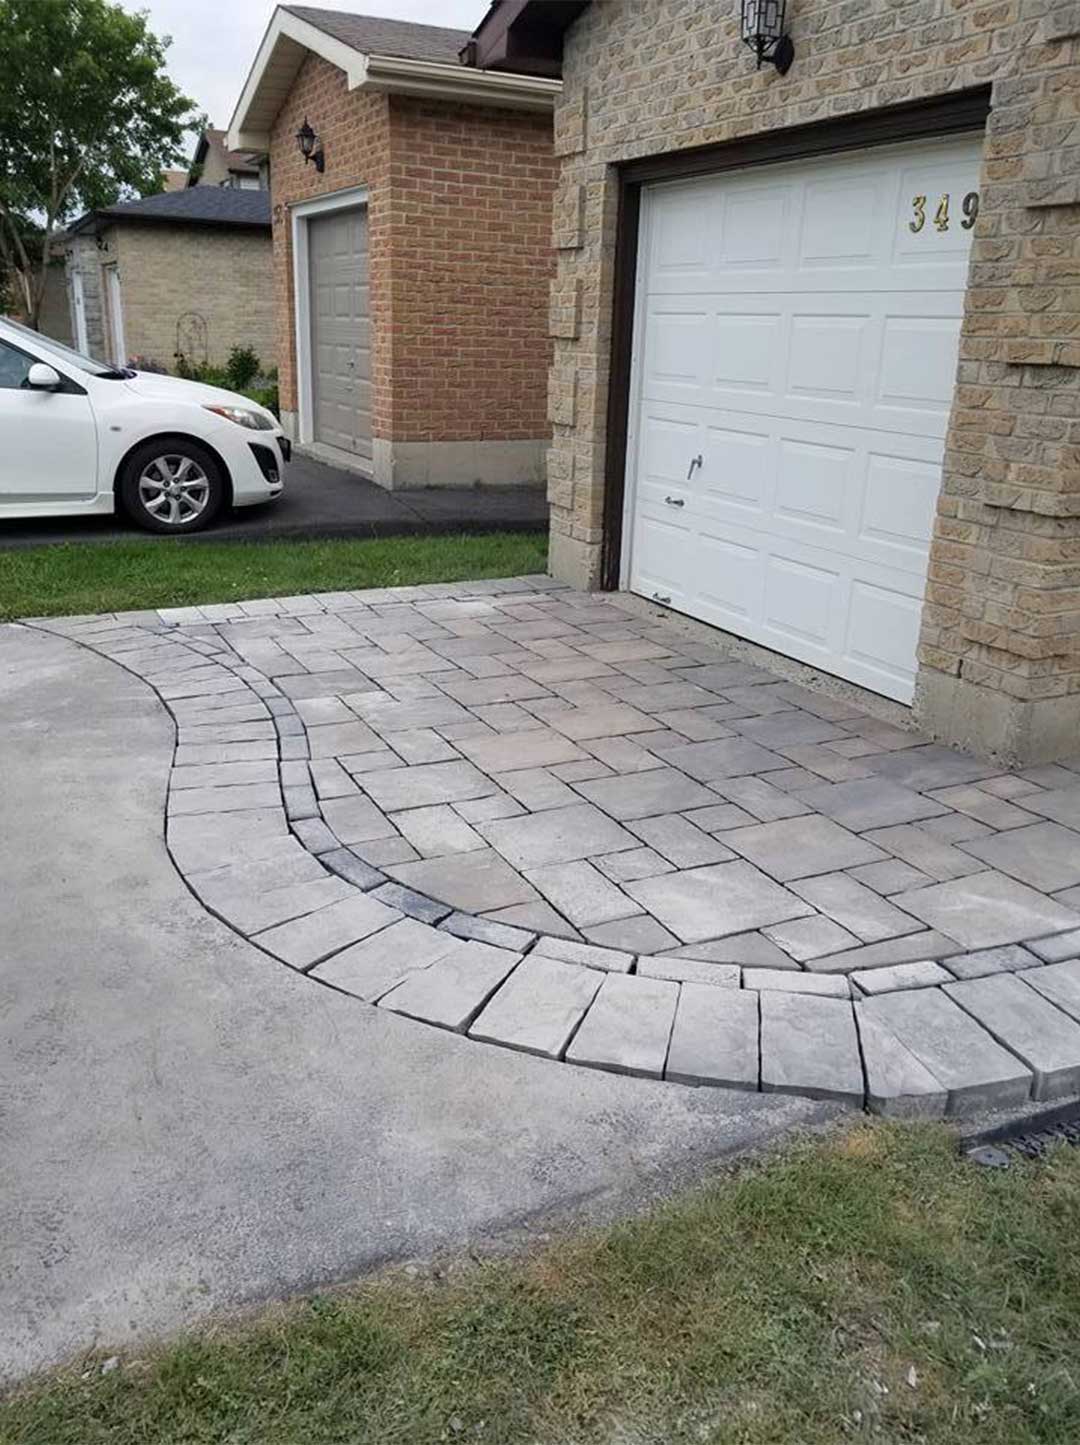 interlocking stone patio at top of driveway in front of garage